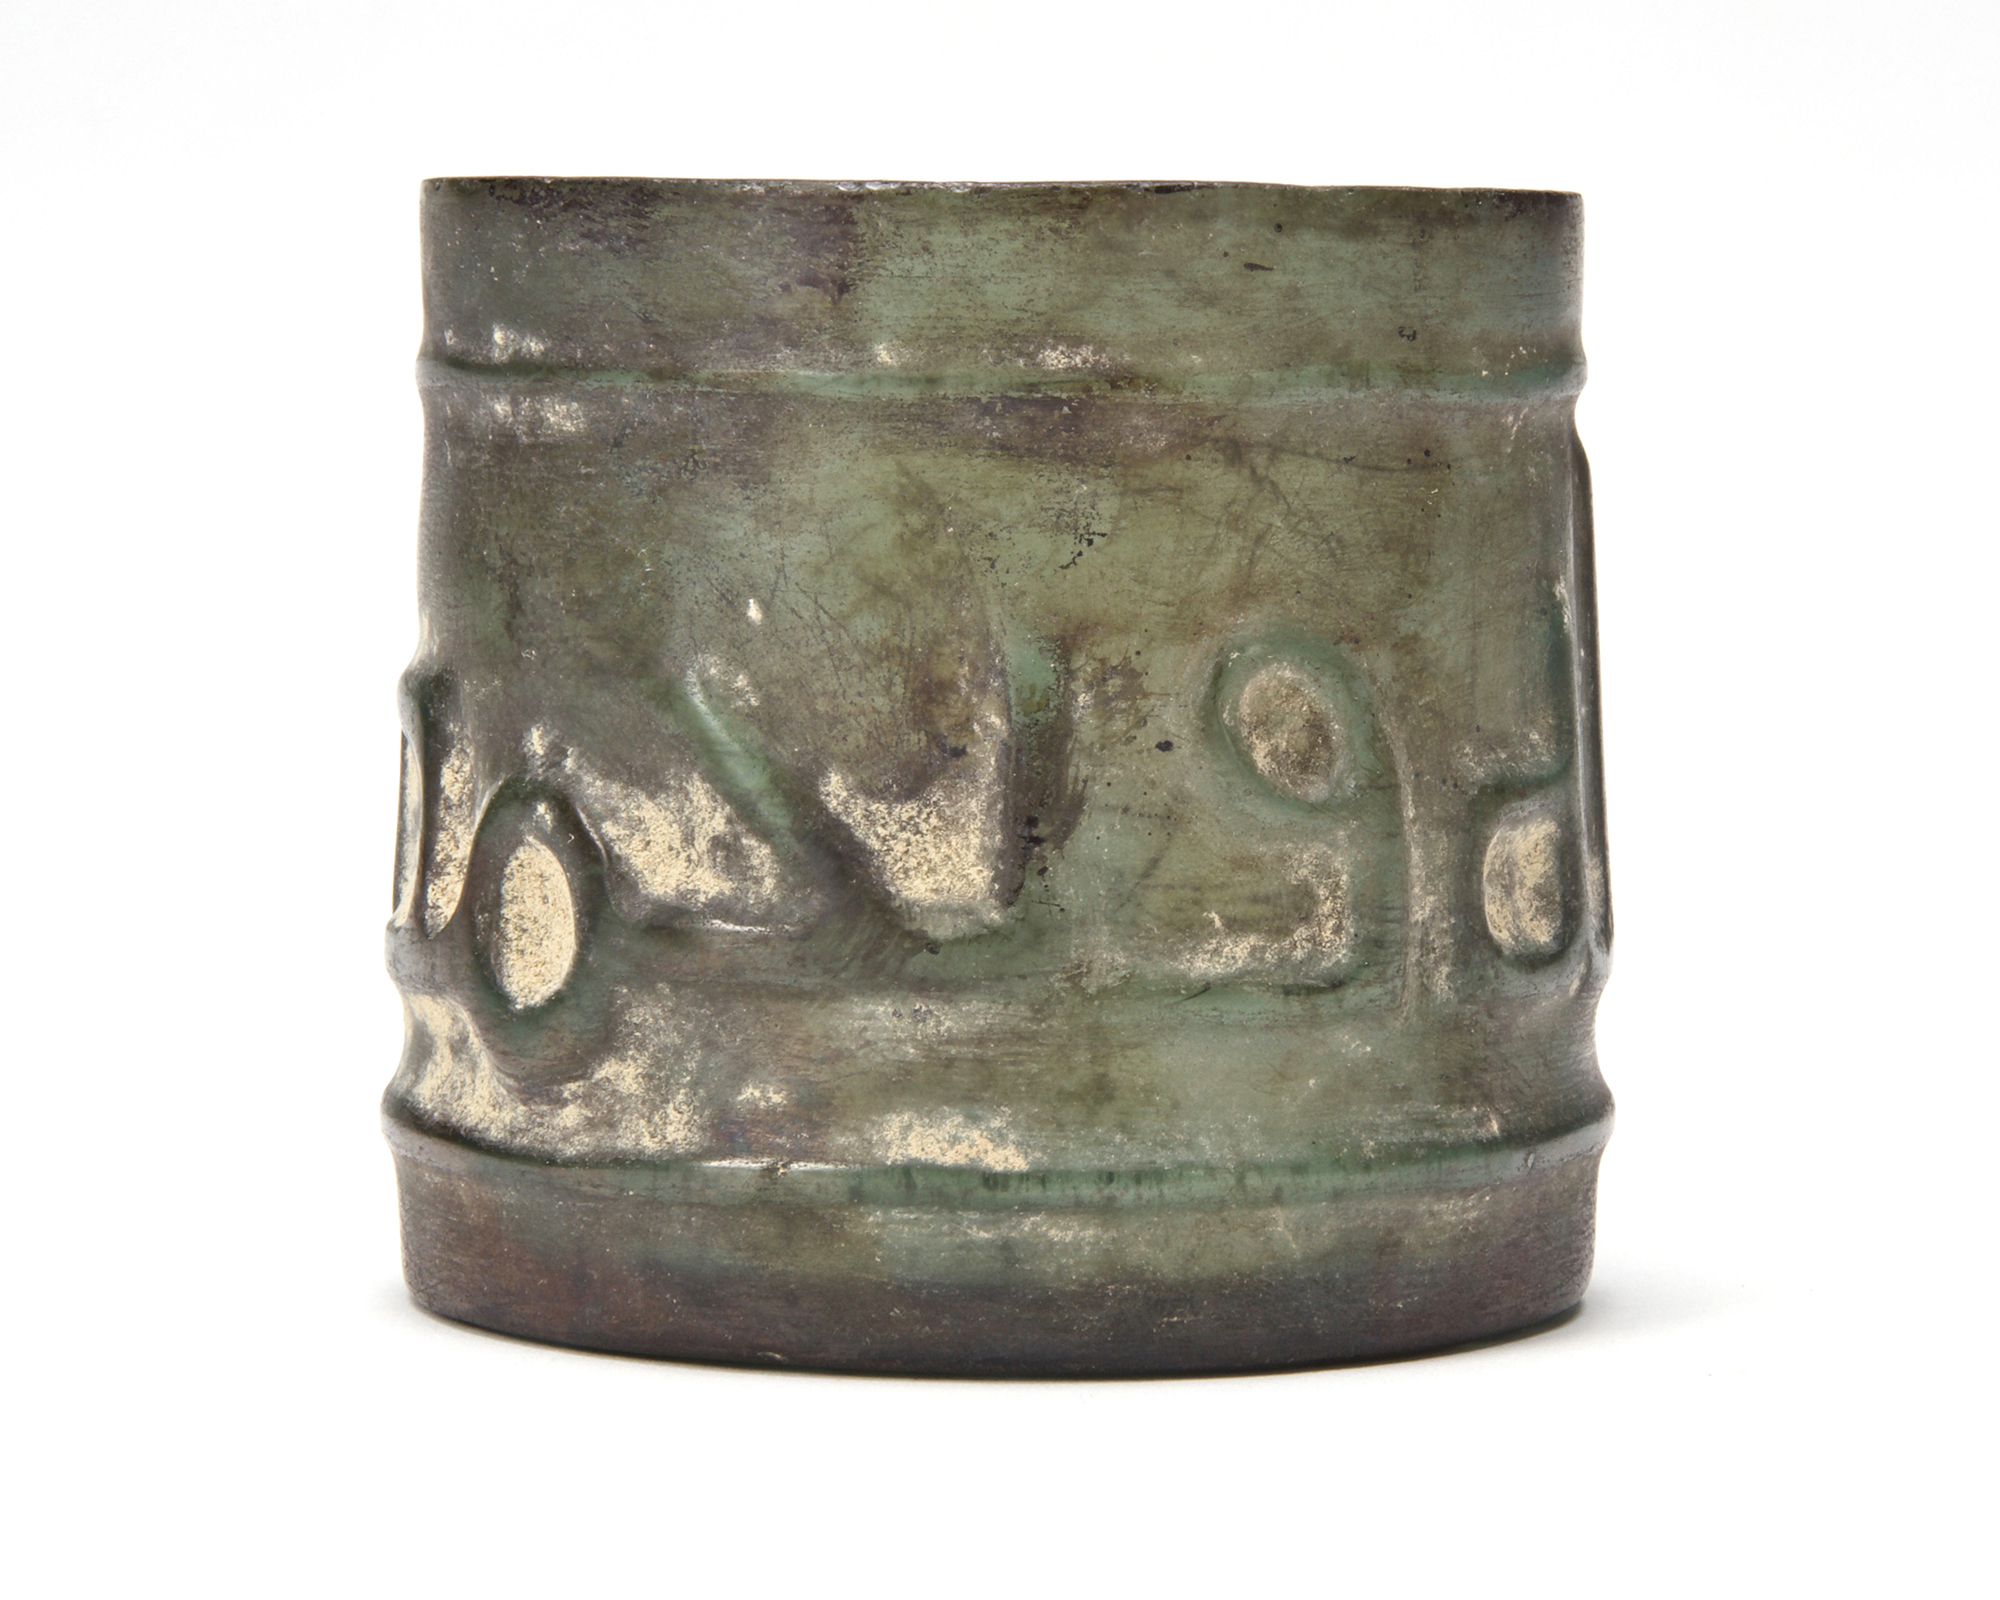 A GLASS BEAKER, SYRIA, 10TH-11TH CENTURY - Image 6 of 14